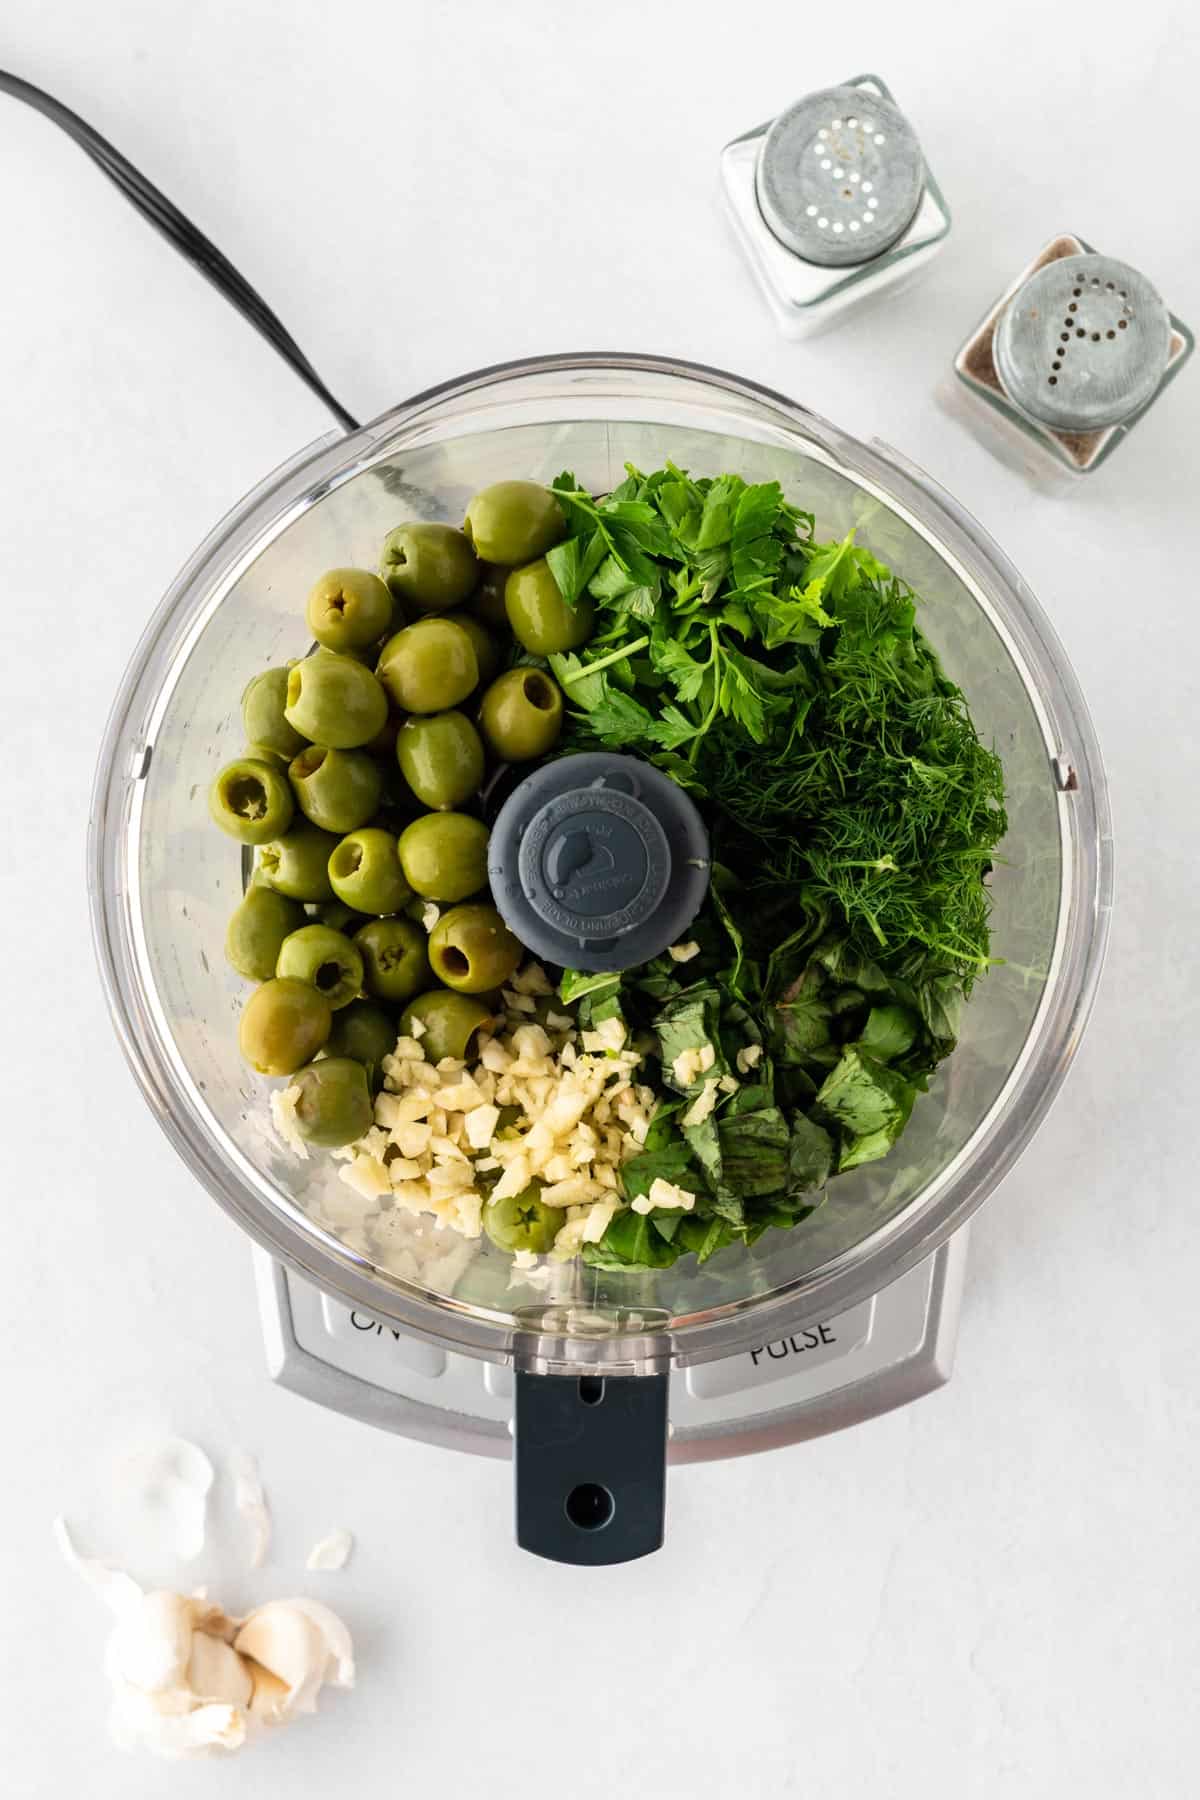 A picture of green olives, herbs, and garlic in a food processor.